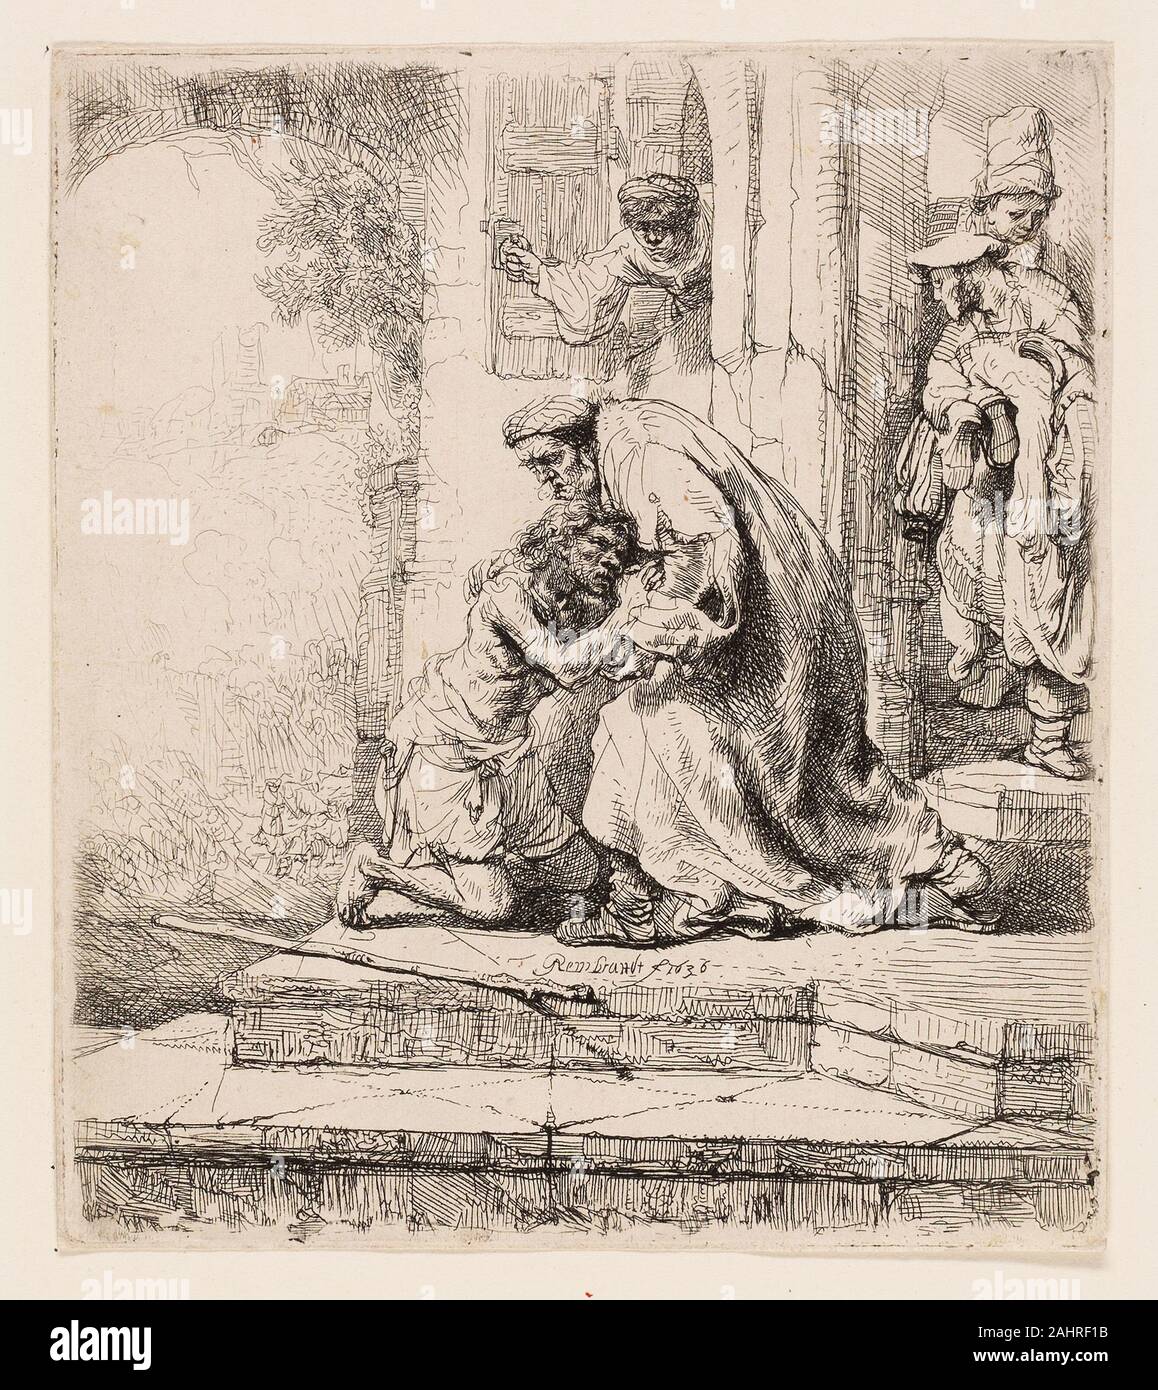 Rembrandt van Rijn. The Return of the Prodigal Son. 1636. Holland. Etching on ivory laid paper Stock Photo